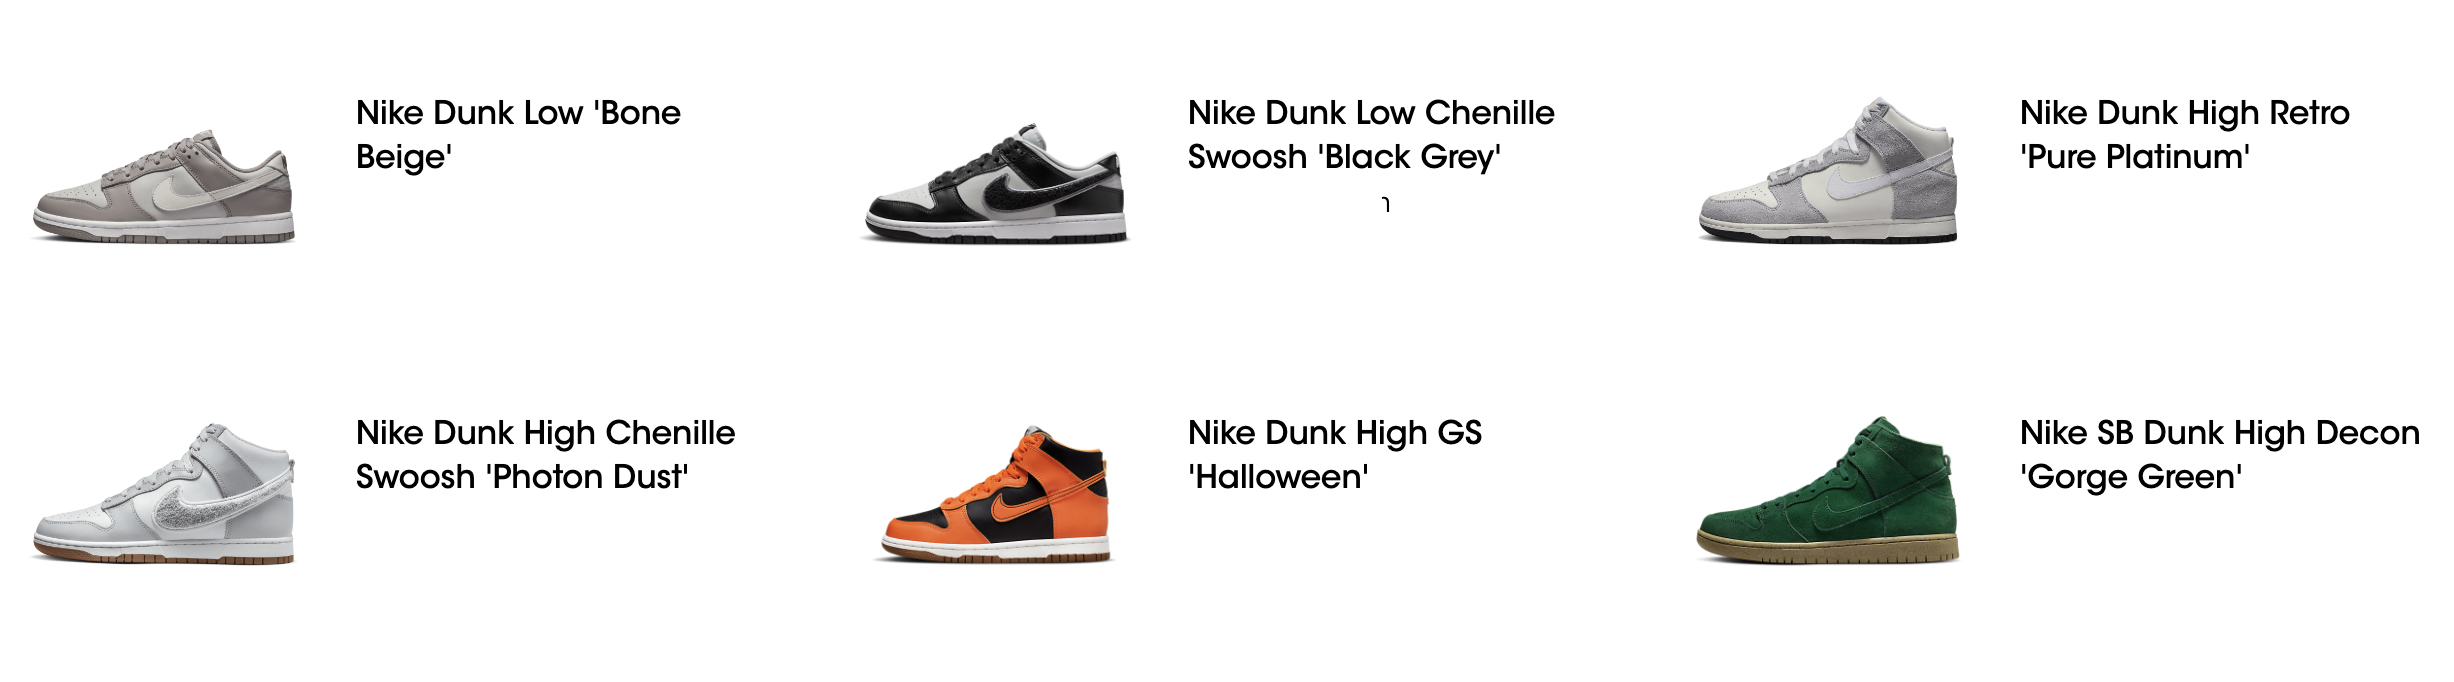 Estúpido Sur oeste Cien años Sneakerjagers on Twitter: "RELEASE REMINDER 🛒 Big Nike Dunk Low &amp; High  drop at 09:00 today! https://t.co/03aXIB7sE6 🚨 Turn on your post  notification to stay up to date on future drops. https://t.co/wRdBmSEit1" /